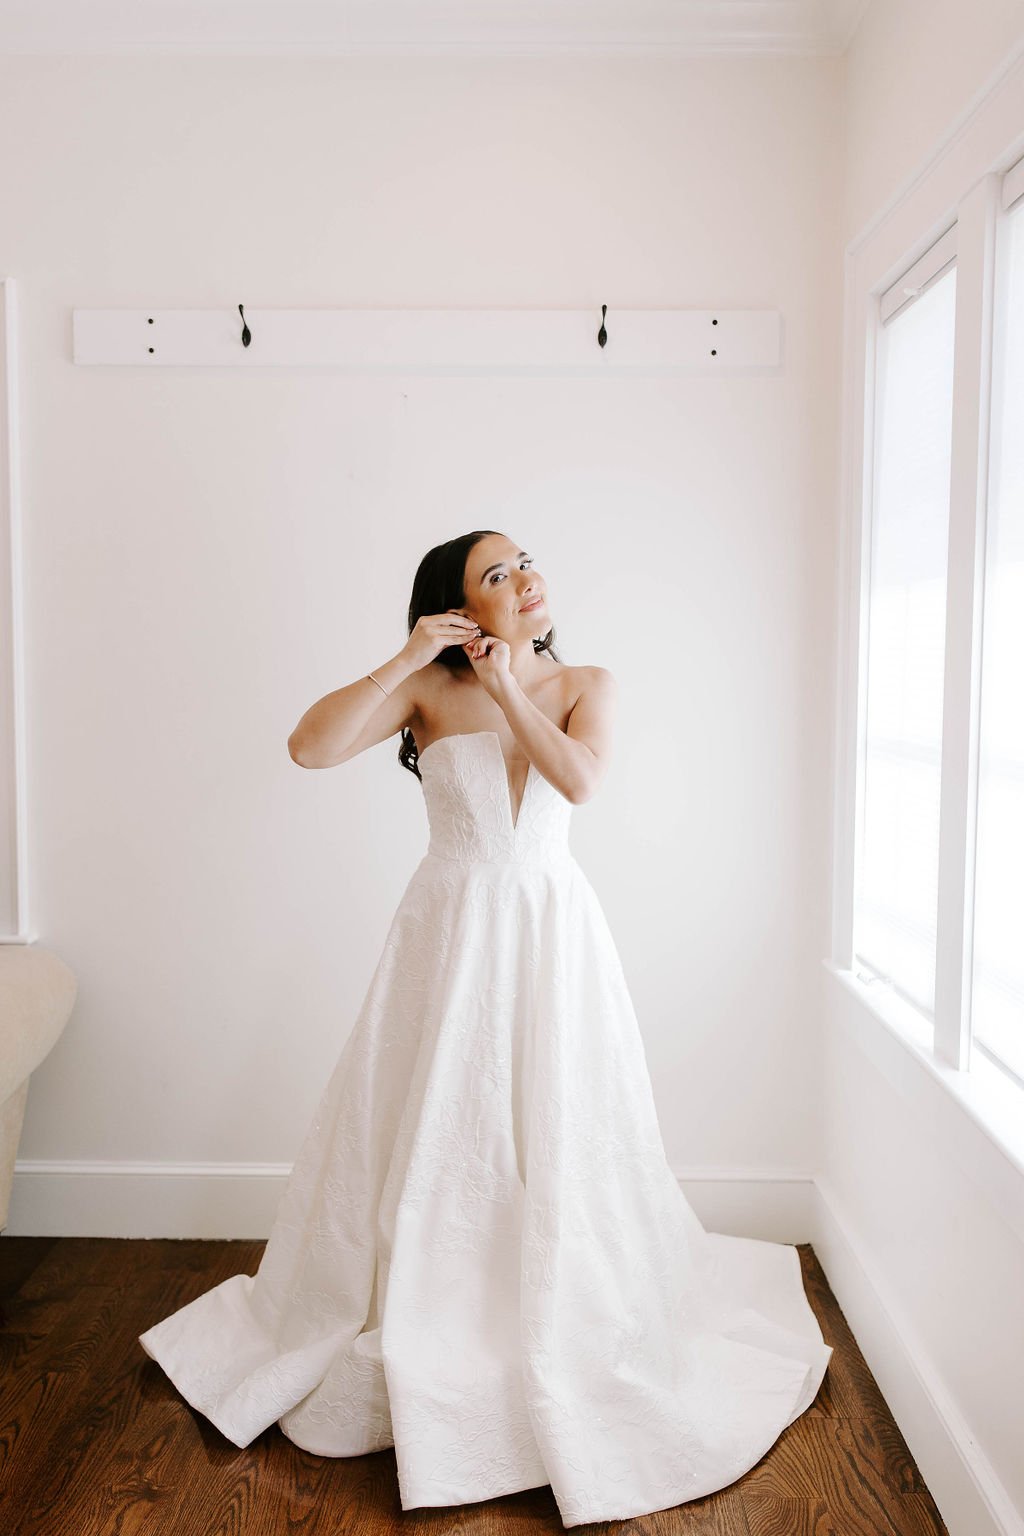  Bride wearing a strapless ball gown wedding dress putting in earrings  